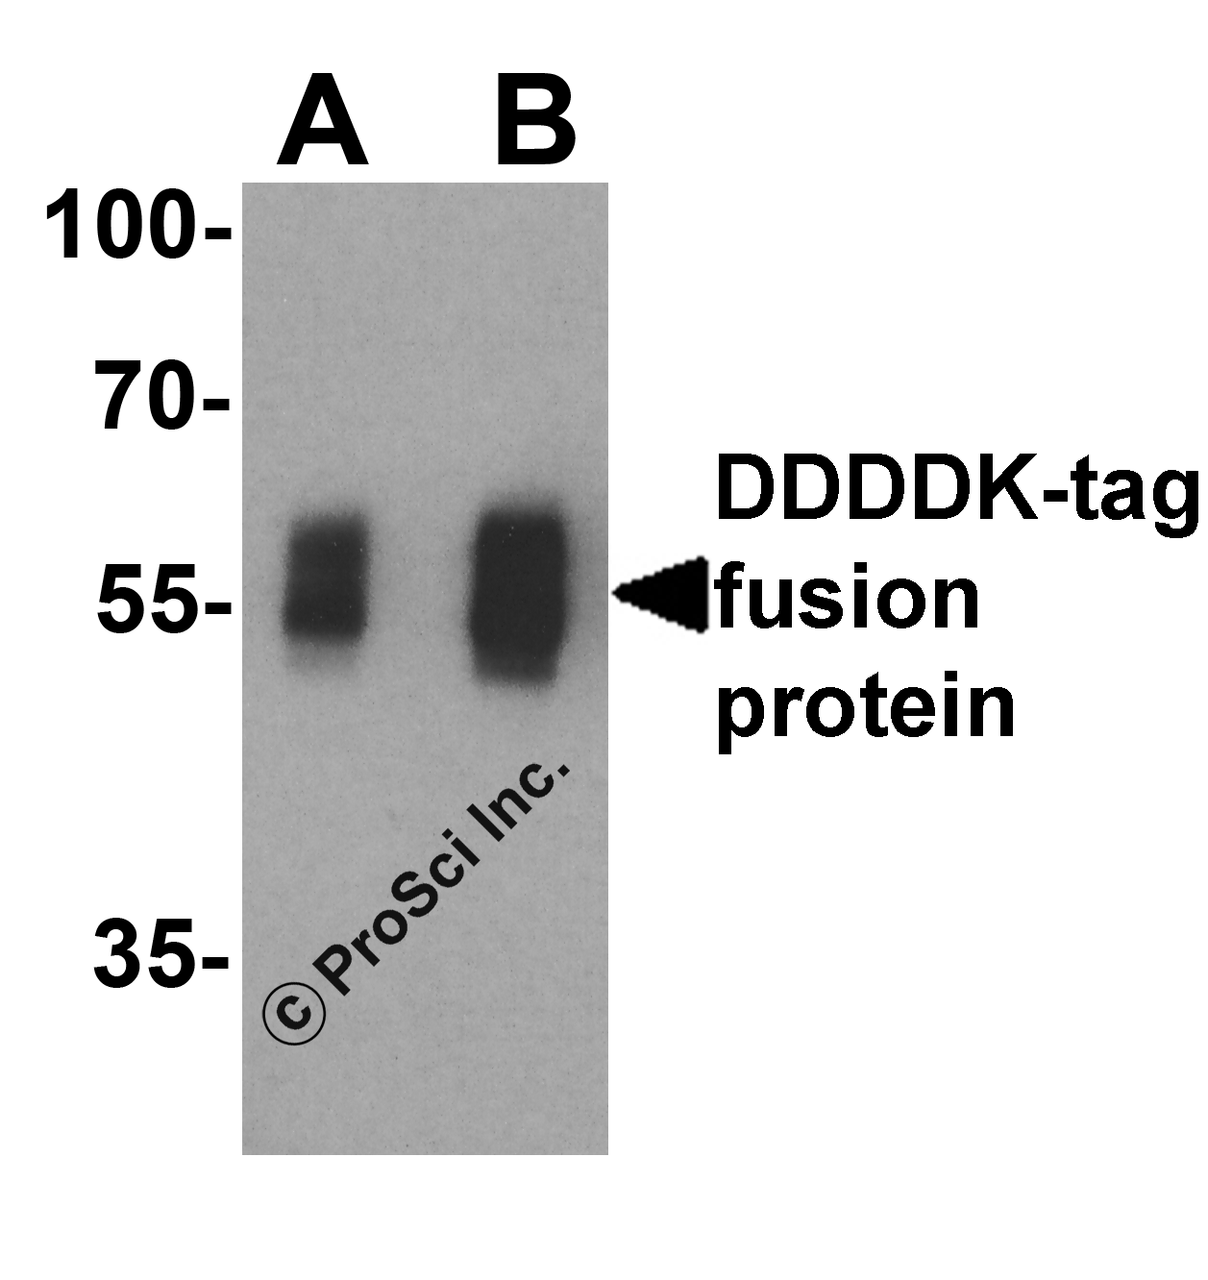 Western blot analysis of a DDDDK-tag-containing recombinant protein with DDDDK-tag antibody at (A) 0.125 and (B) 0.25 &#956;g/ml.